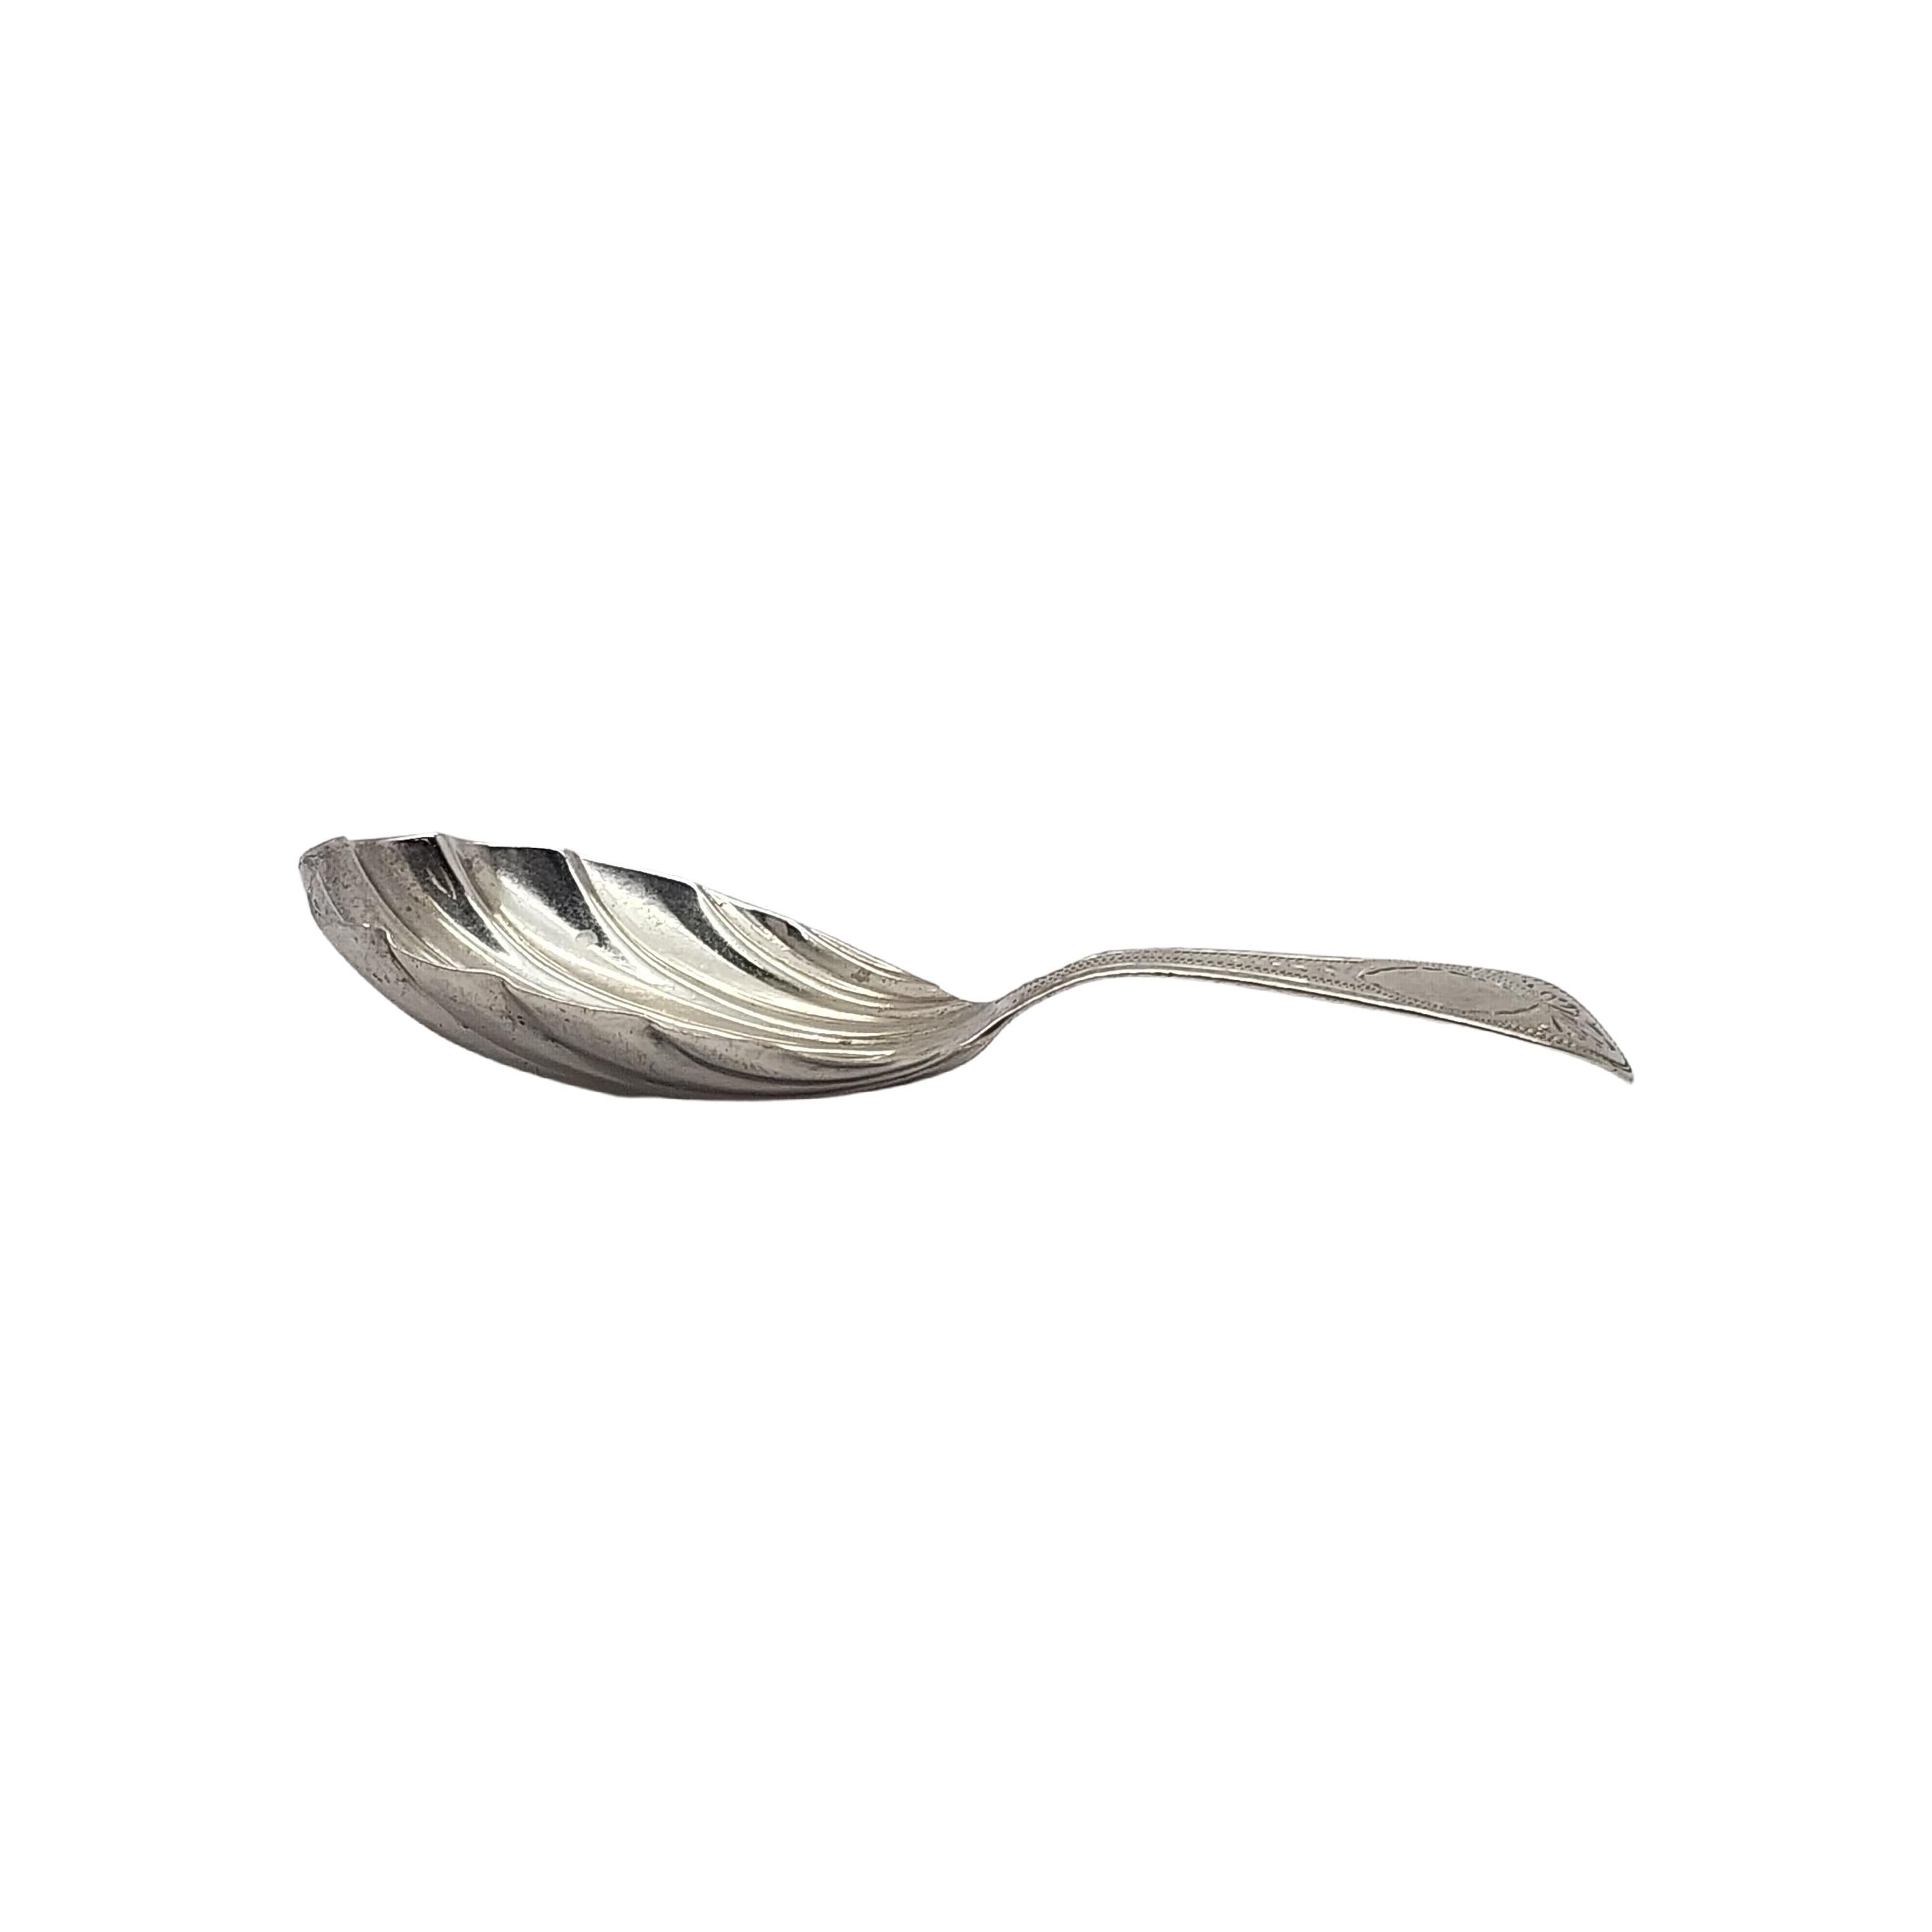 Antique Richard Crossley London English Sterling Tea Caddy Shell Bowl Spoon In Good Condition For Sale In Washington Depot, CT